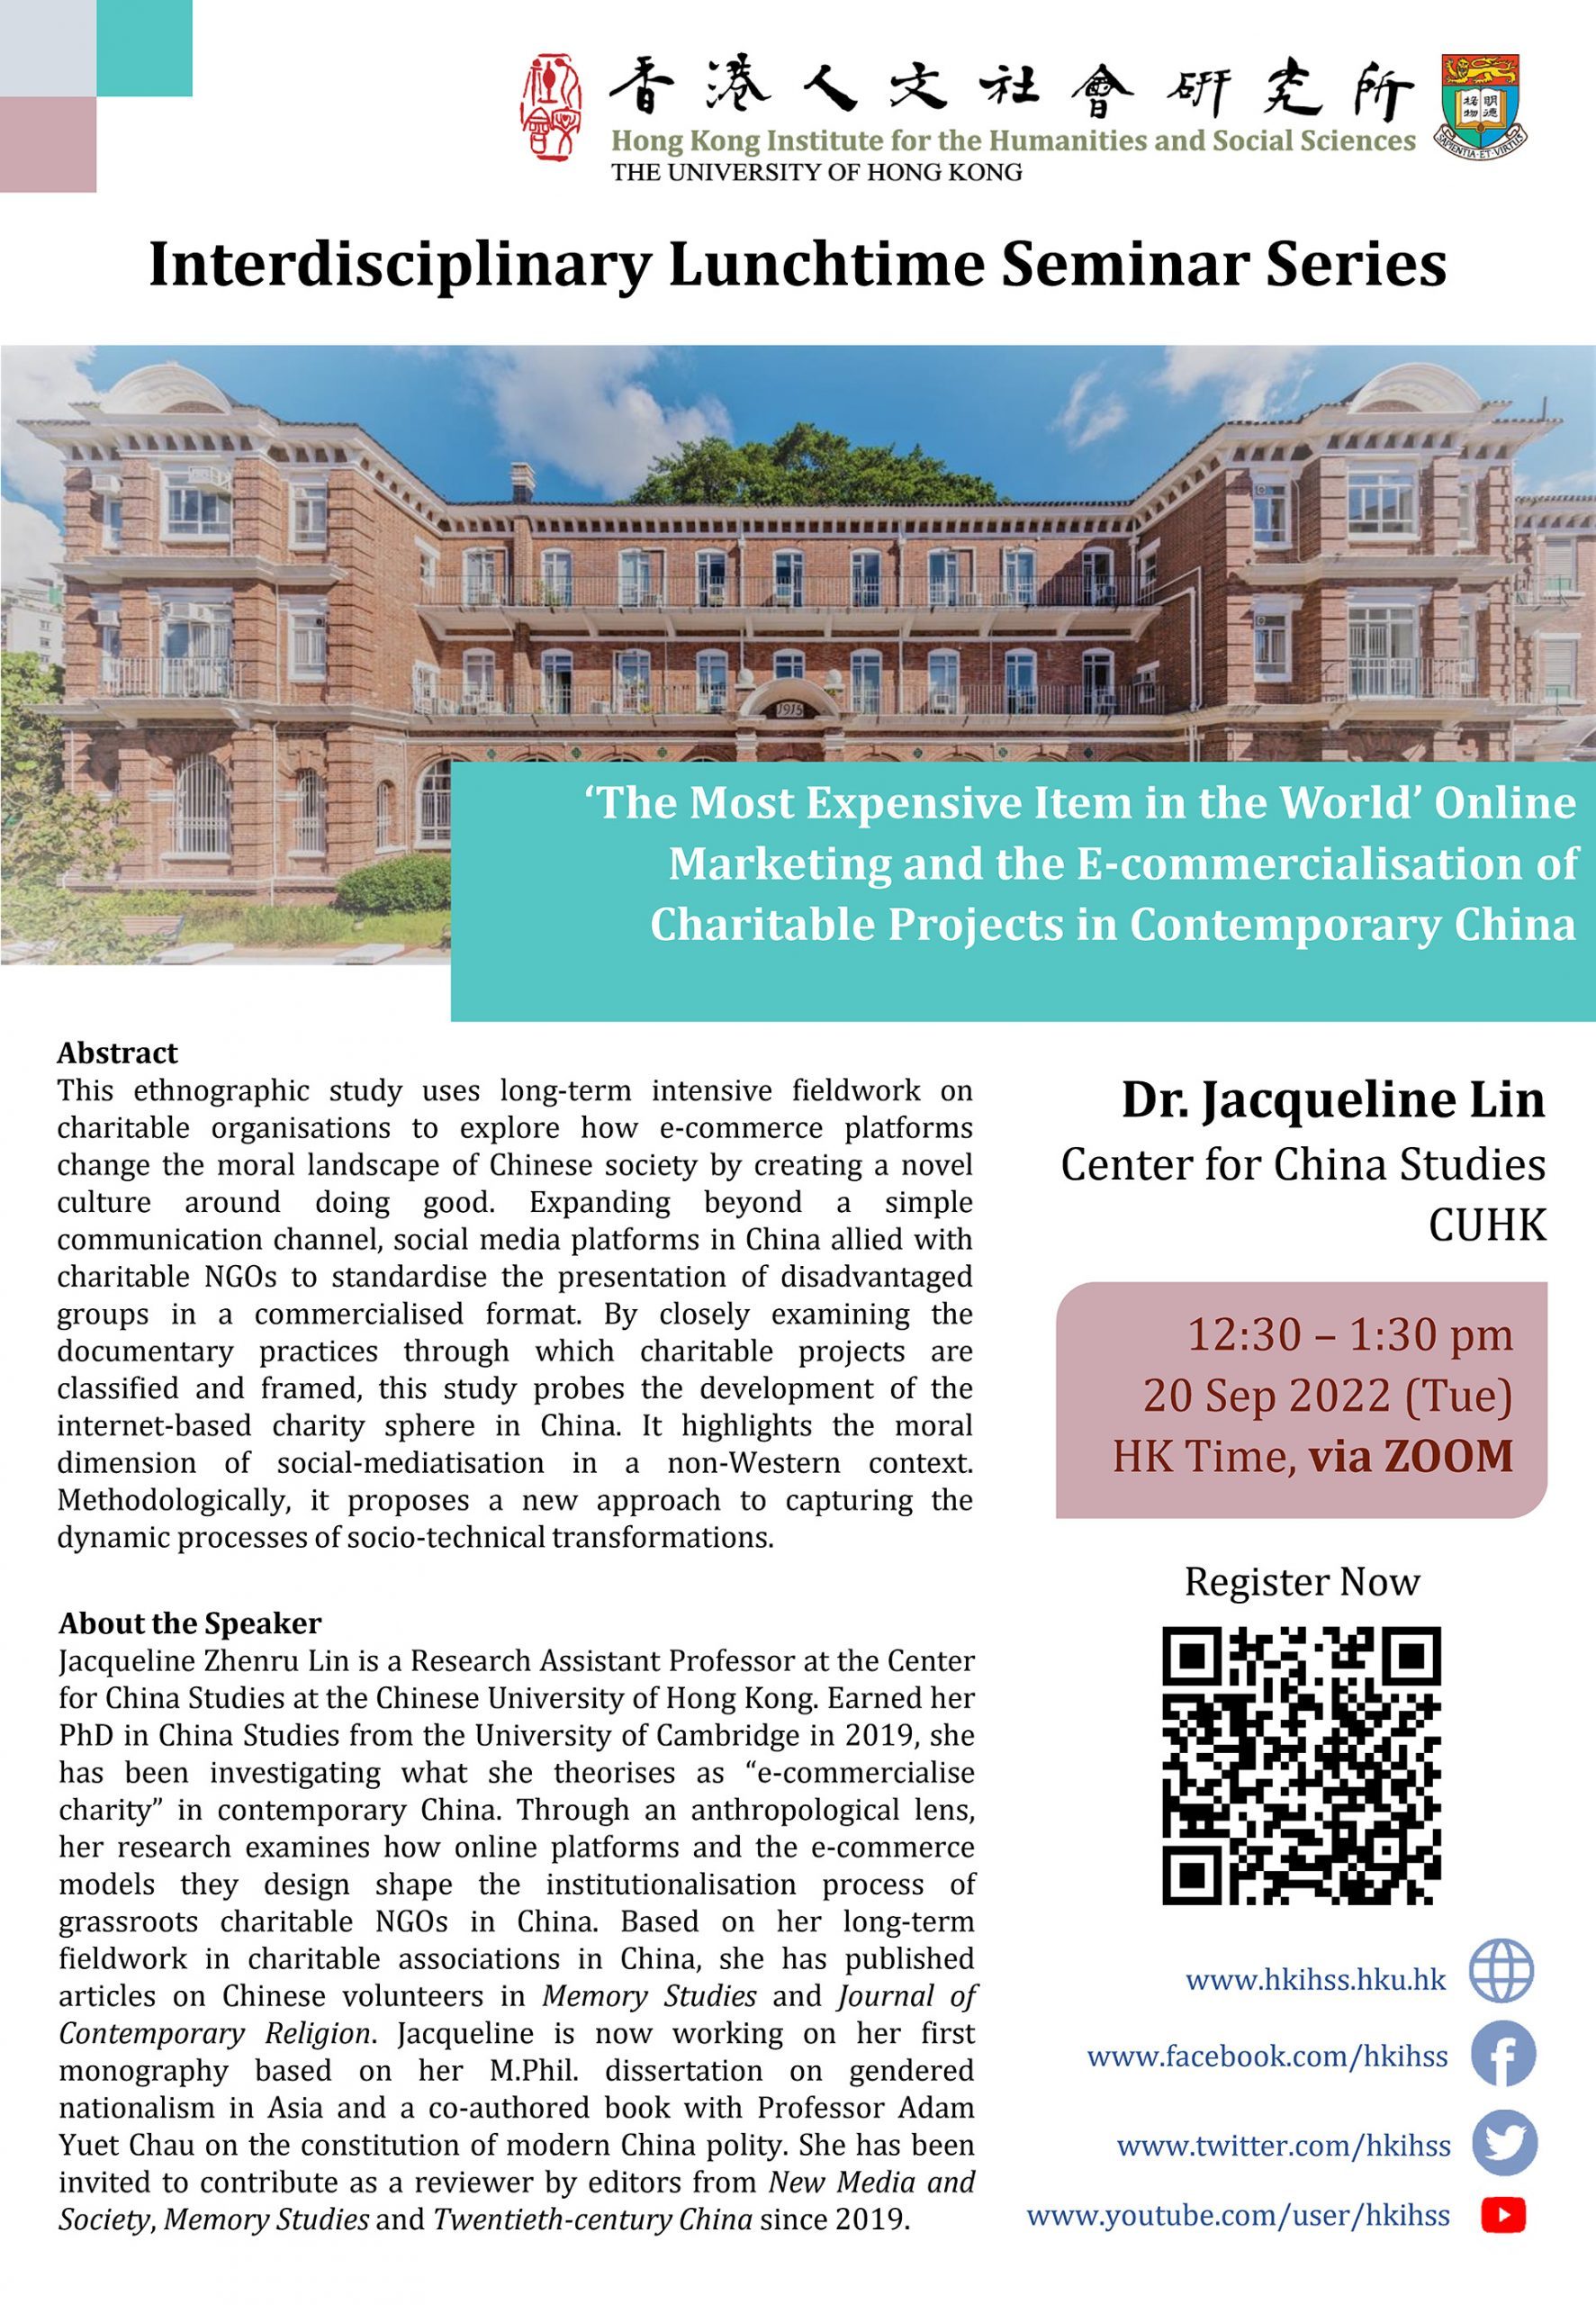 Interdisciplinary Lunchtime Seminar on “‘The Most Expensive Item in the World’ Online Marketing and the E-commercialisation of Charitable Projects in Contemporary China ” by Dr. Jacqueline Lin (September 20, 2022)